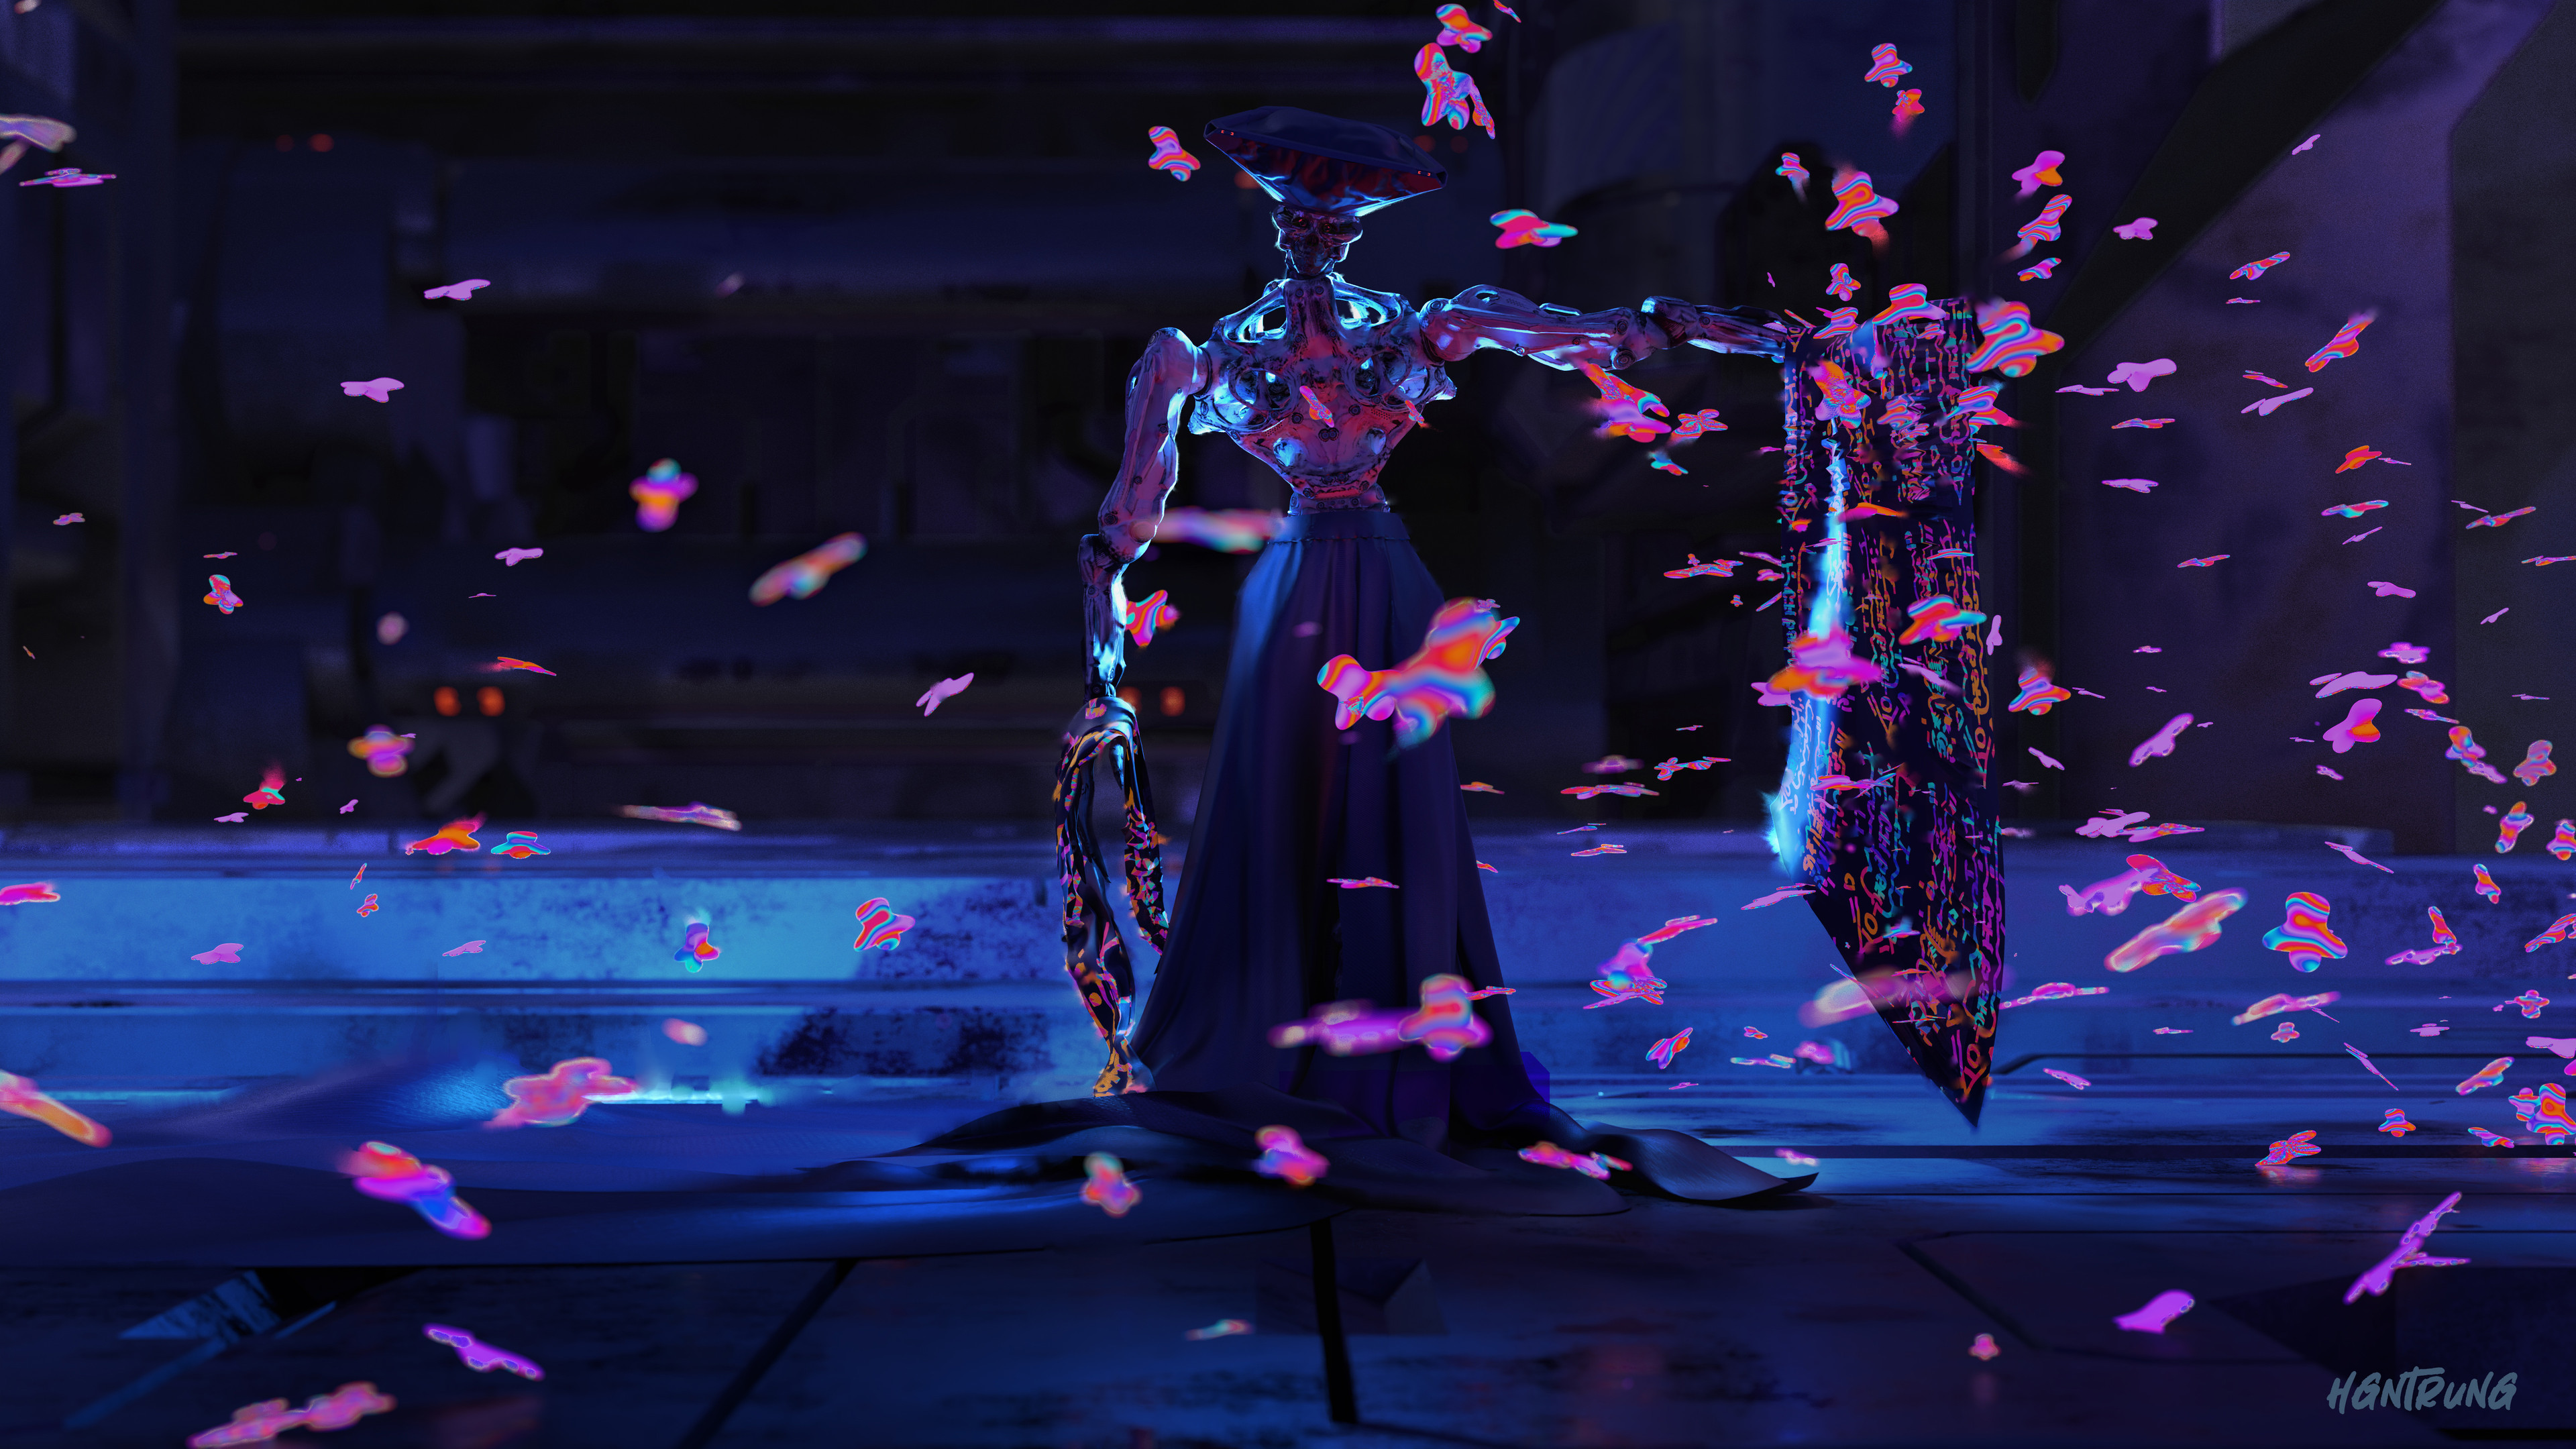 Keyframe concept - Spirit vanishes in the dream world. Ghosts follow the dance of the Shaman to the resting place